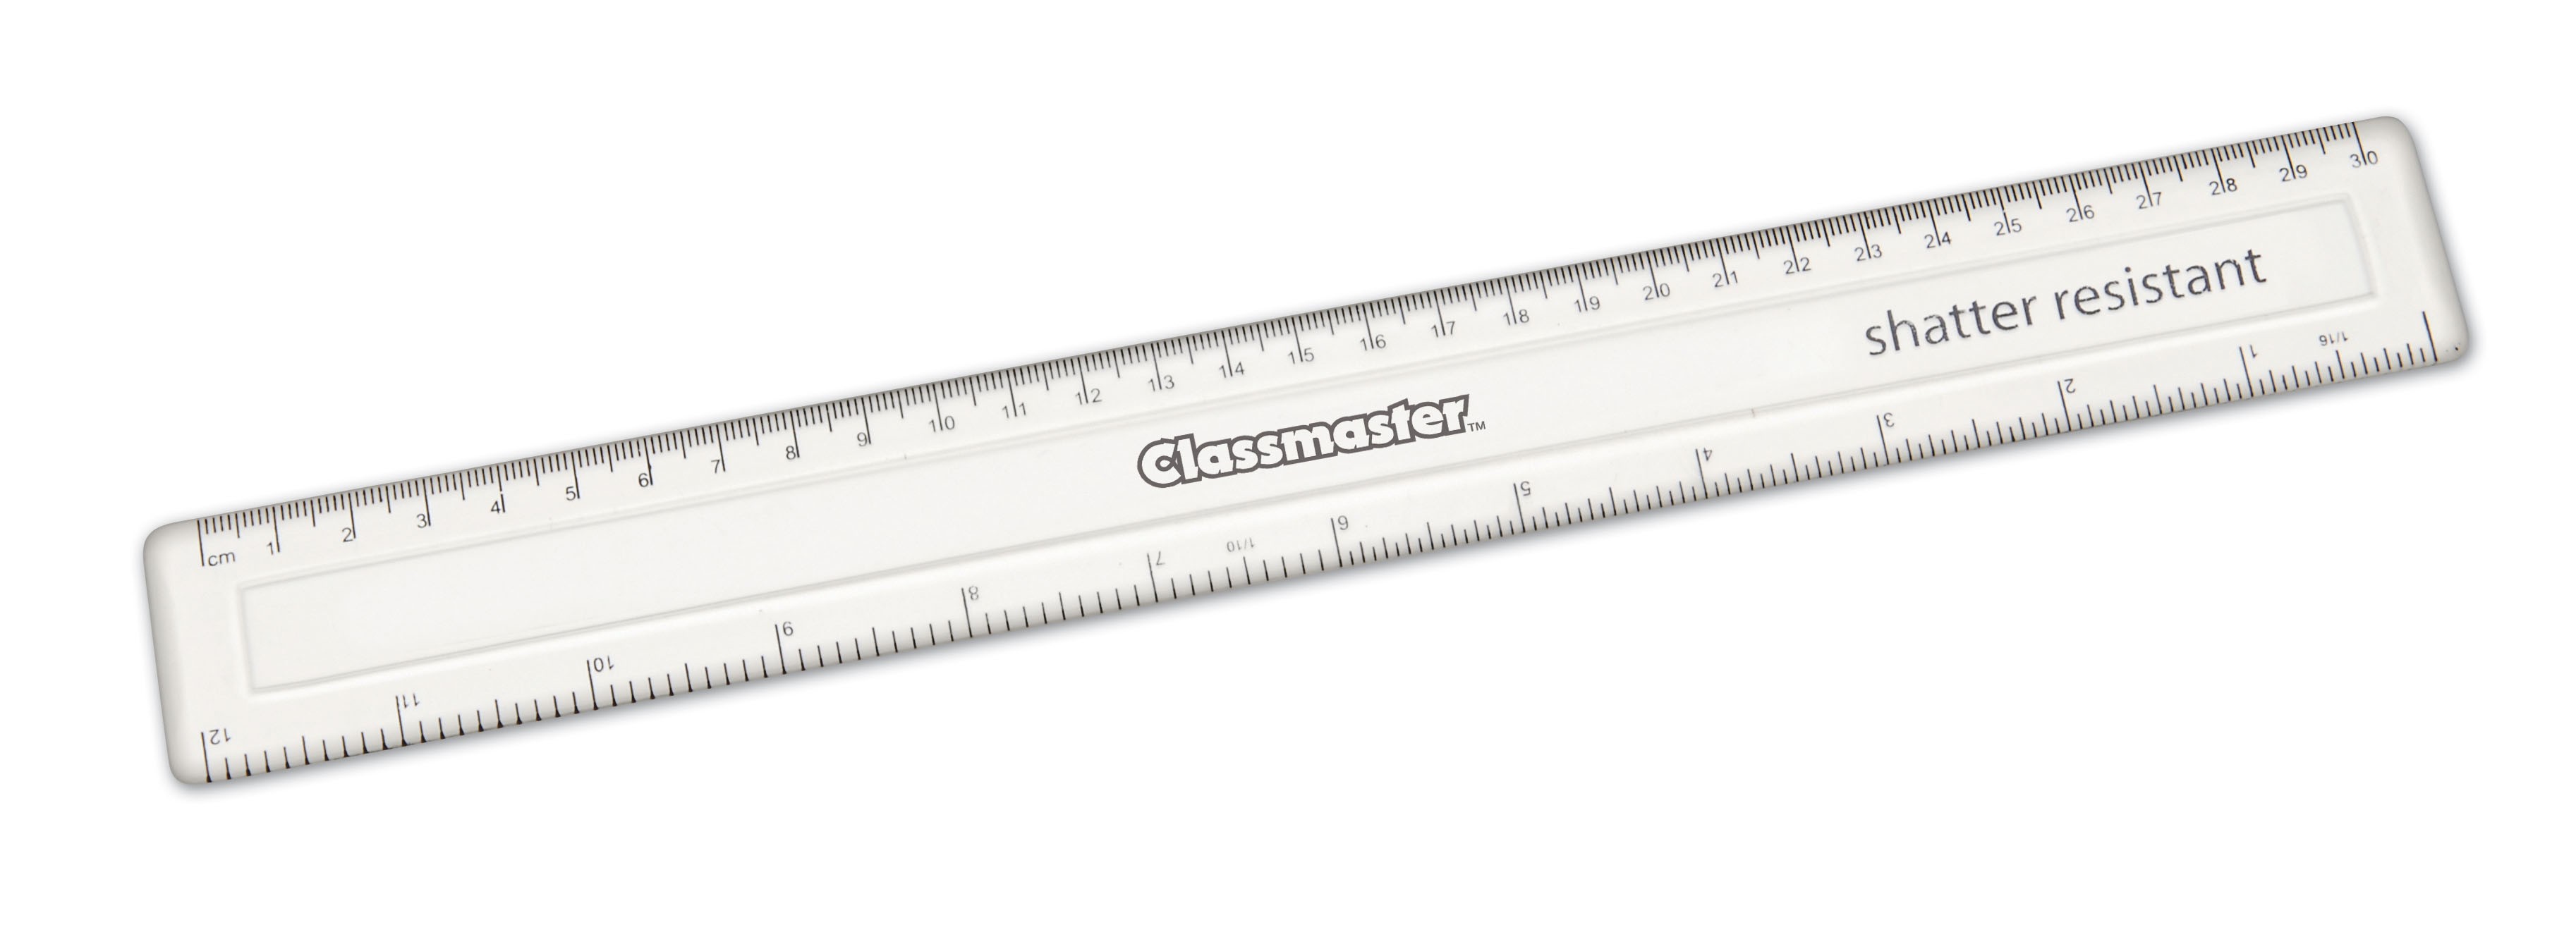 30cm+Rulers+%28Non+Shatter%29+Metric+%26+Imperial